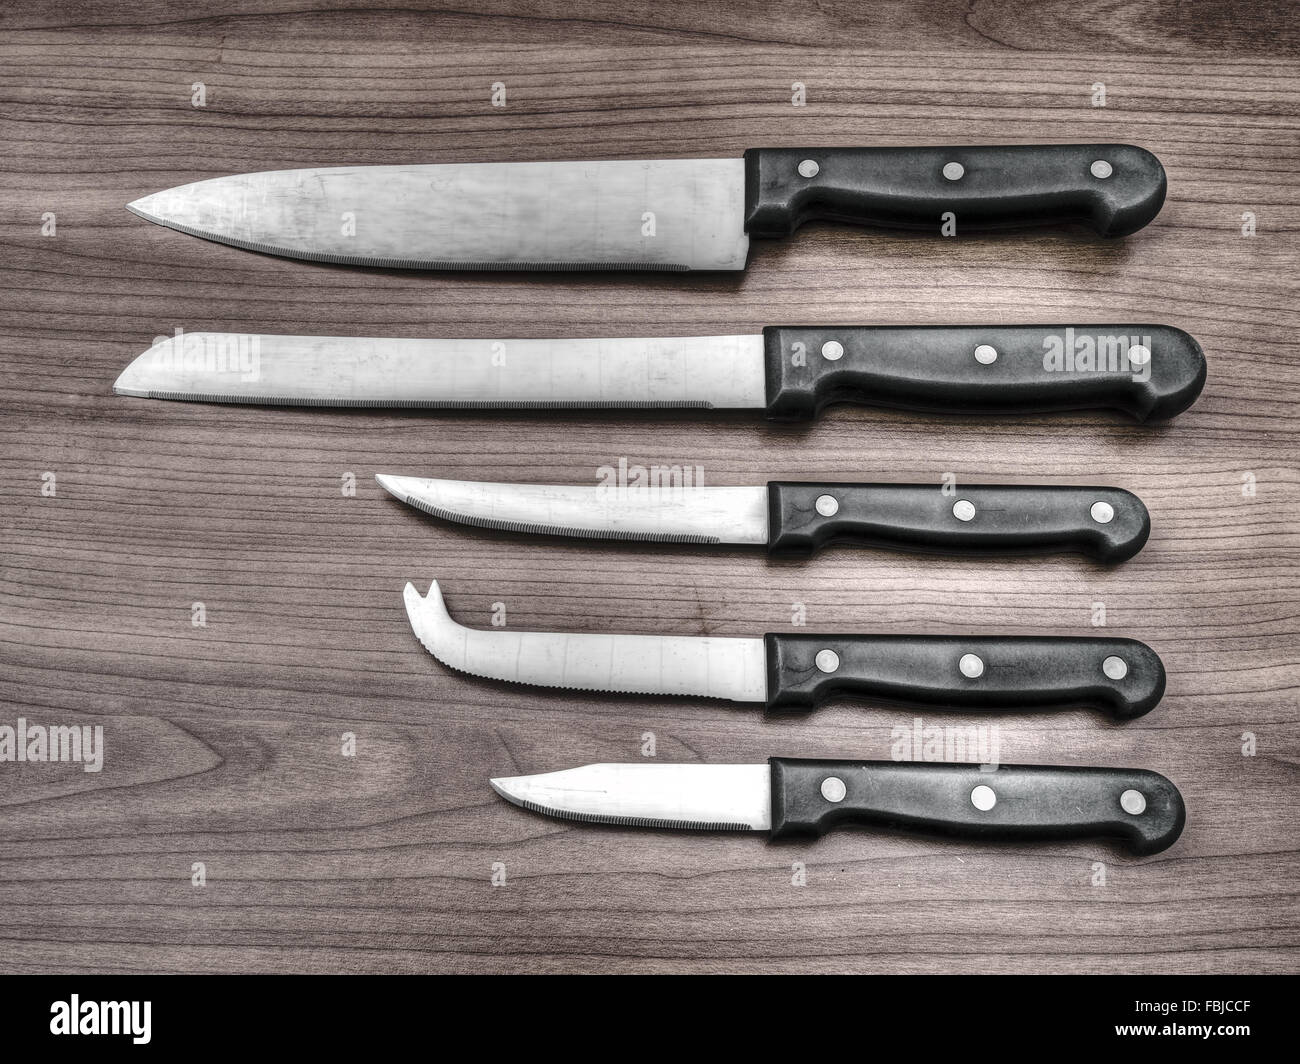 Generic, stainless steel kitchen knives. Stock Photo